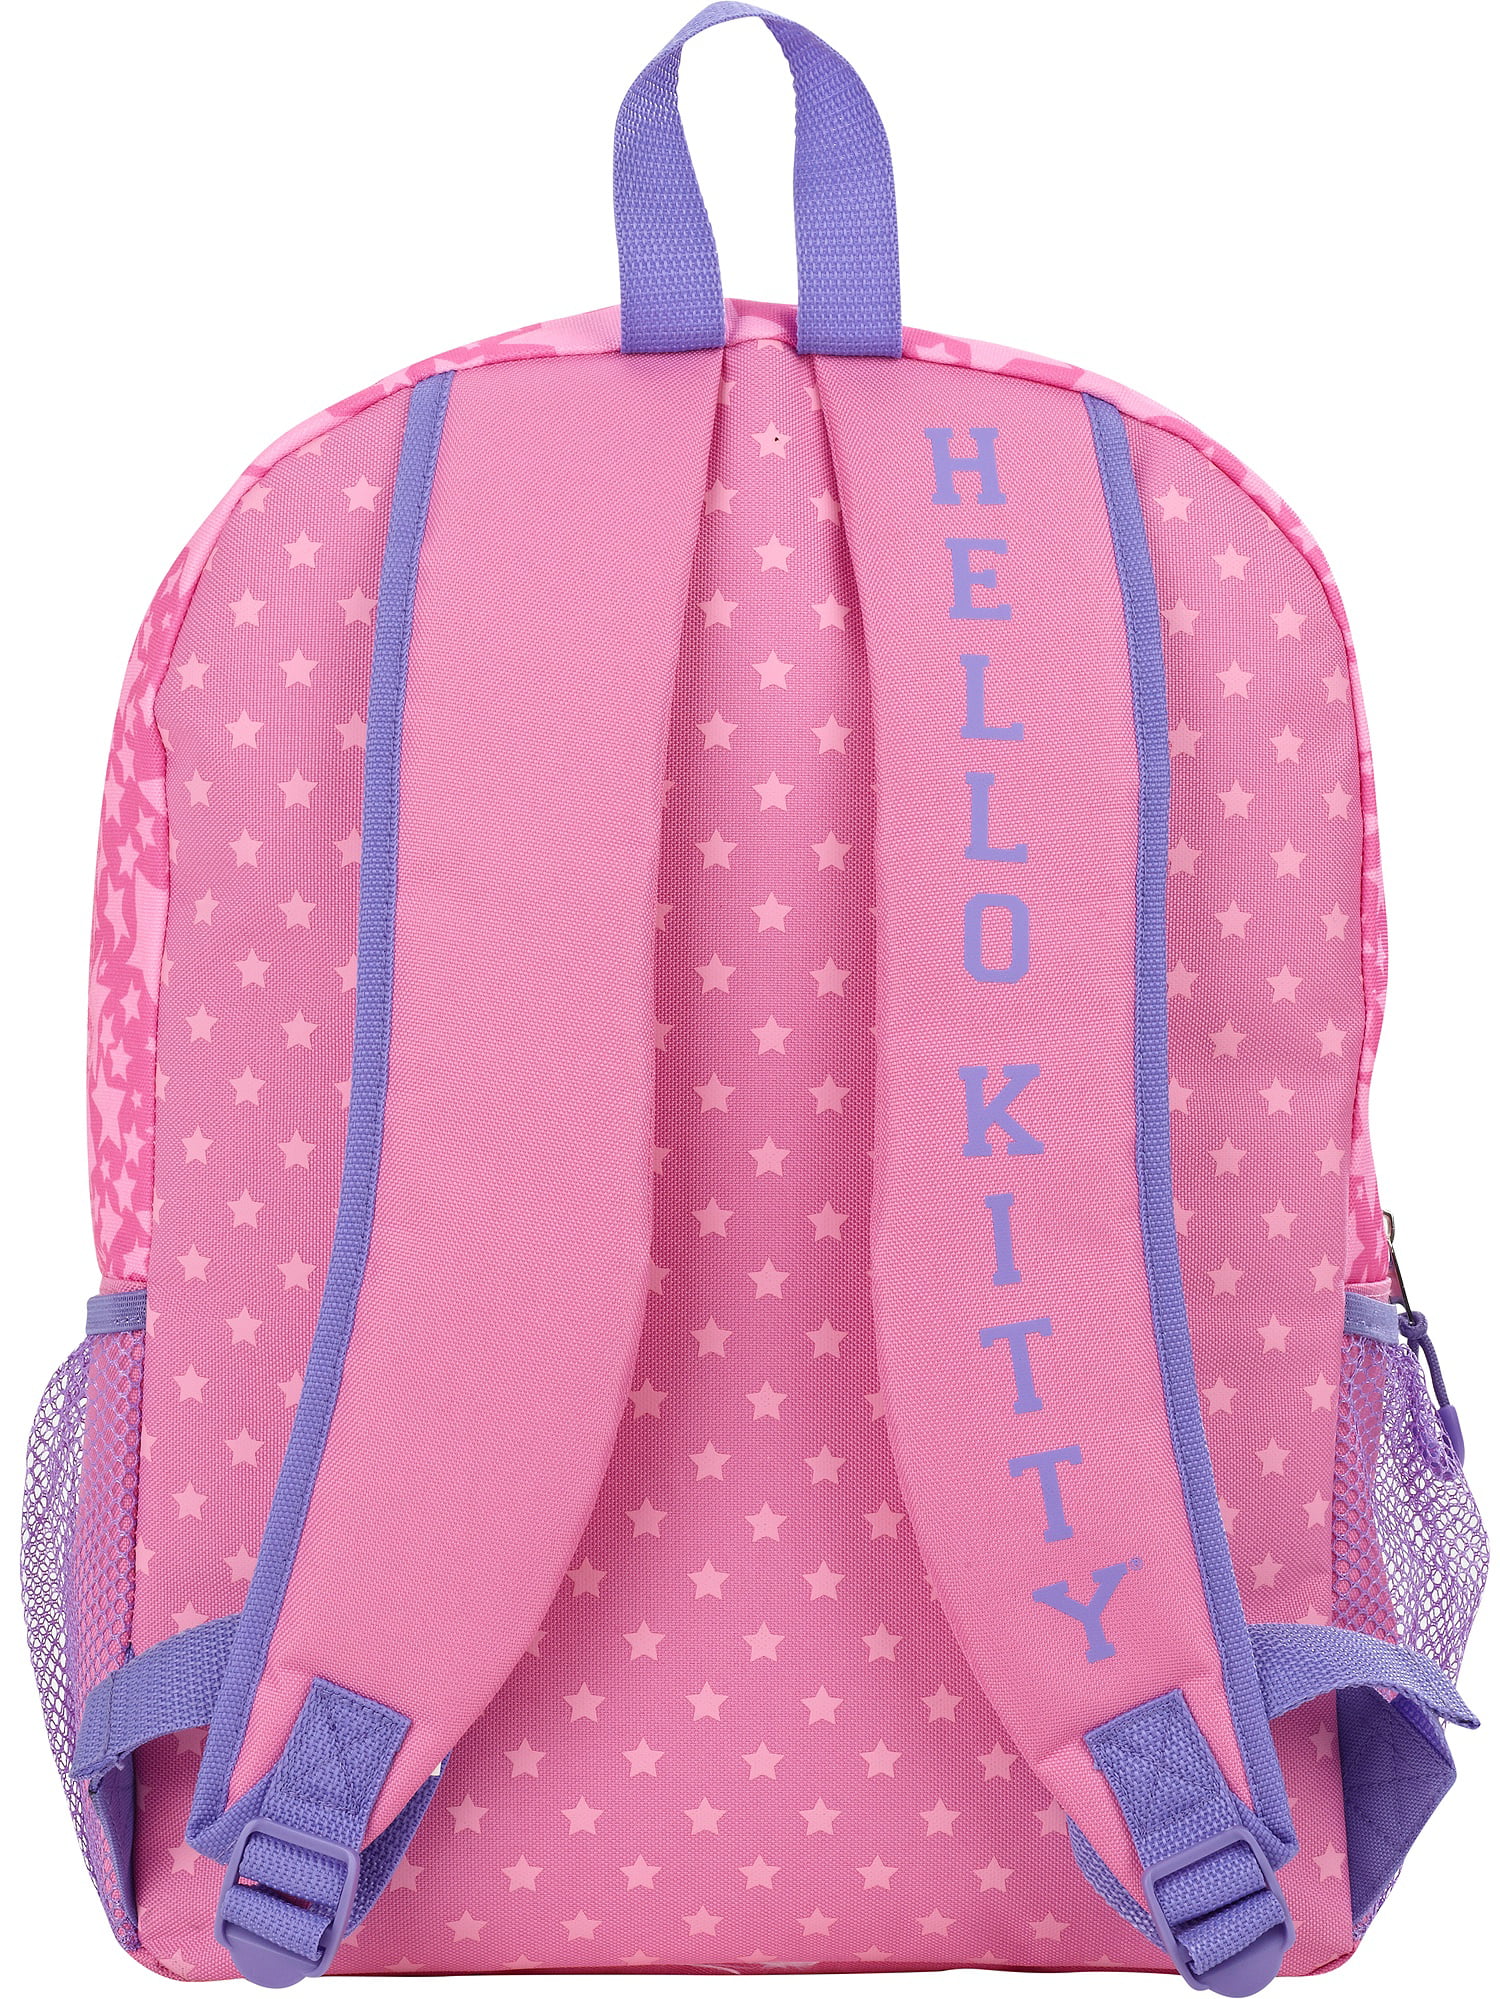 Hello Kitty "Cheer Star" Backpack - pink, one